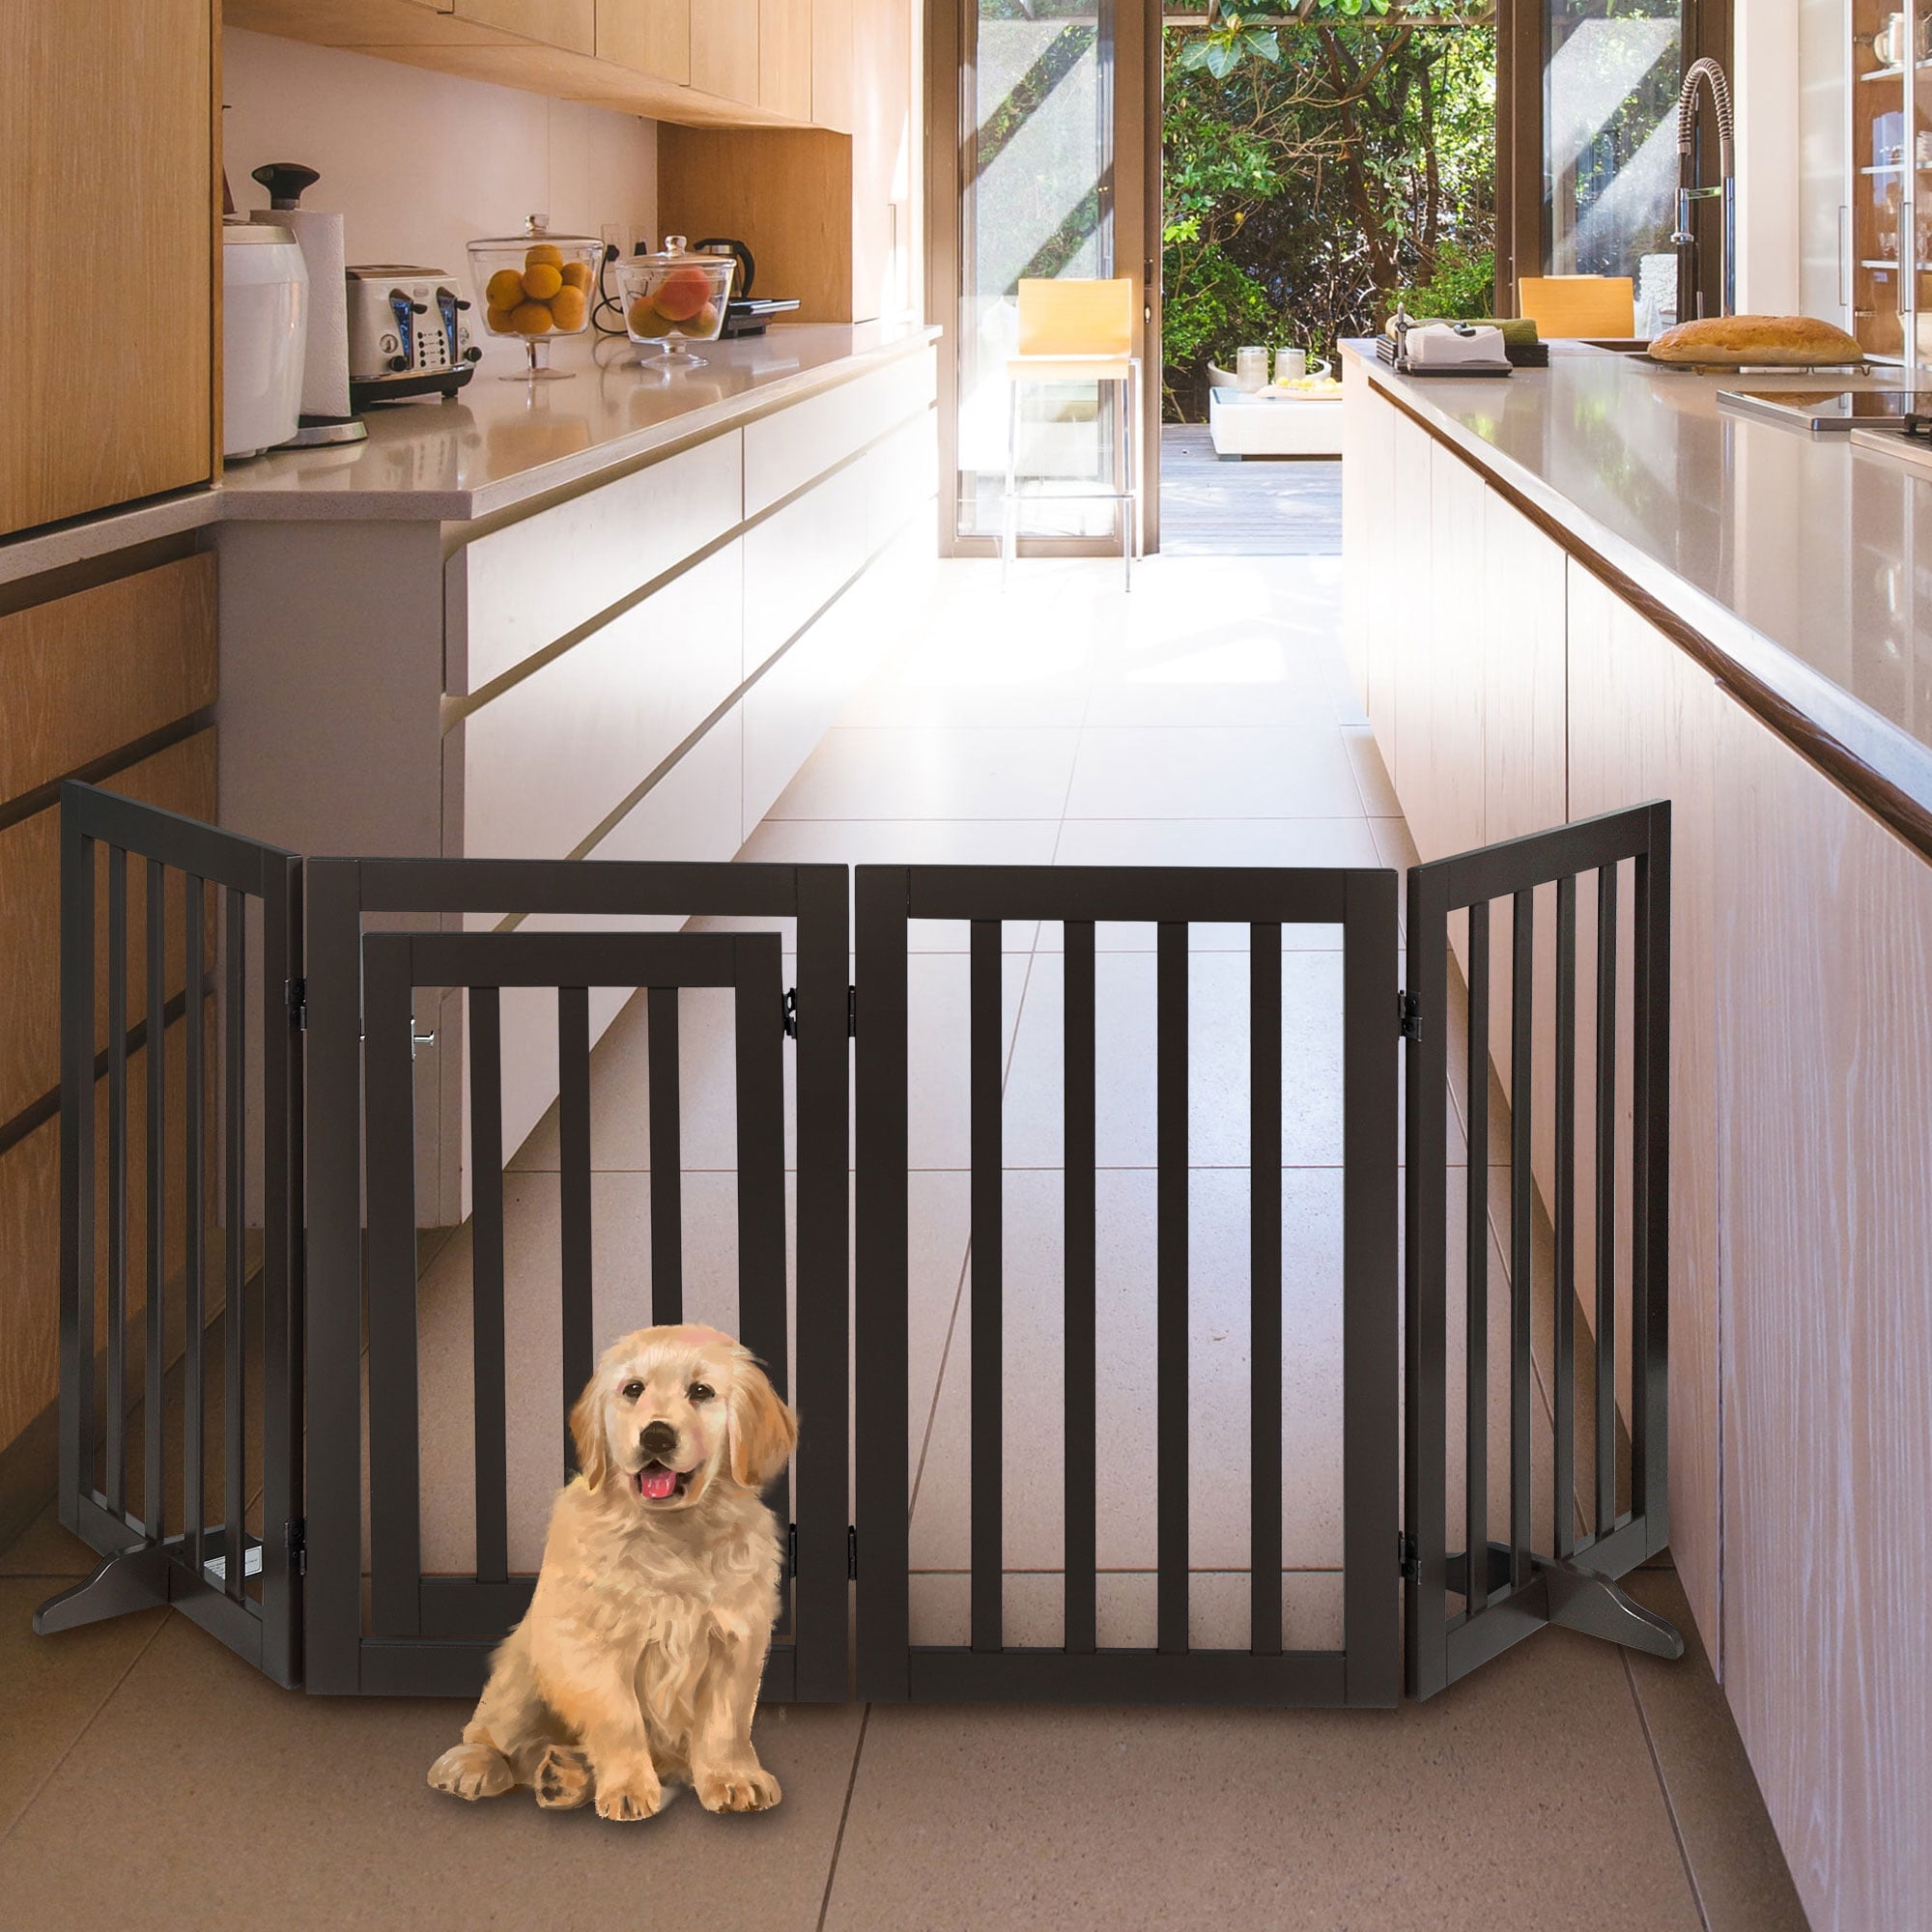 Lowestbest Dog Gate, Safety Gates for Pets, 4 Panel Freestanding Folding Wooden Pet Fence with 2